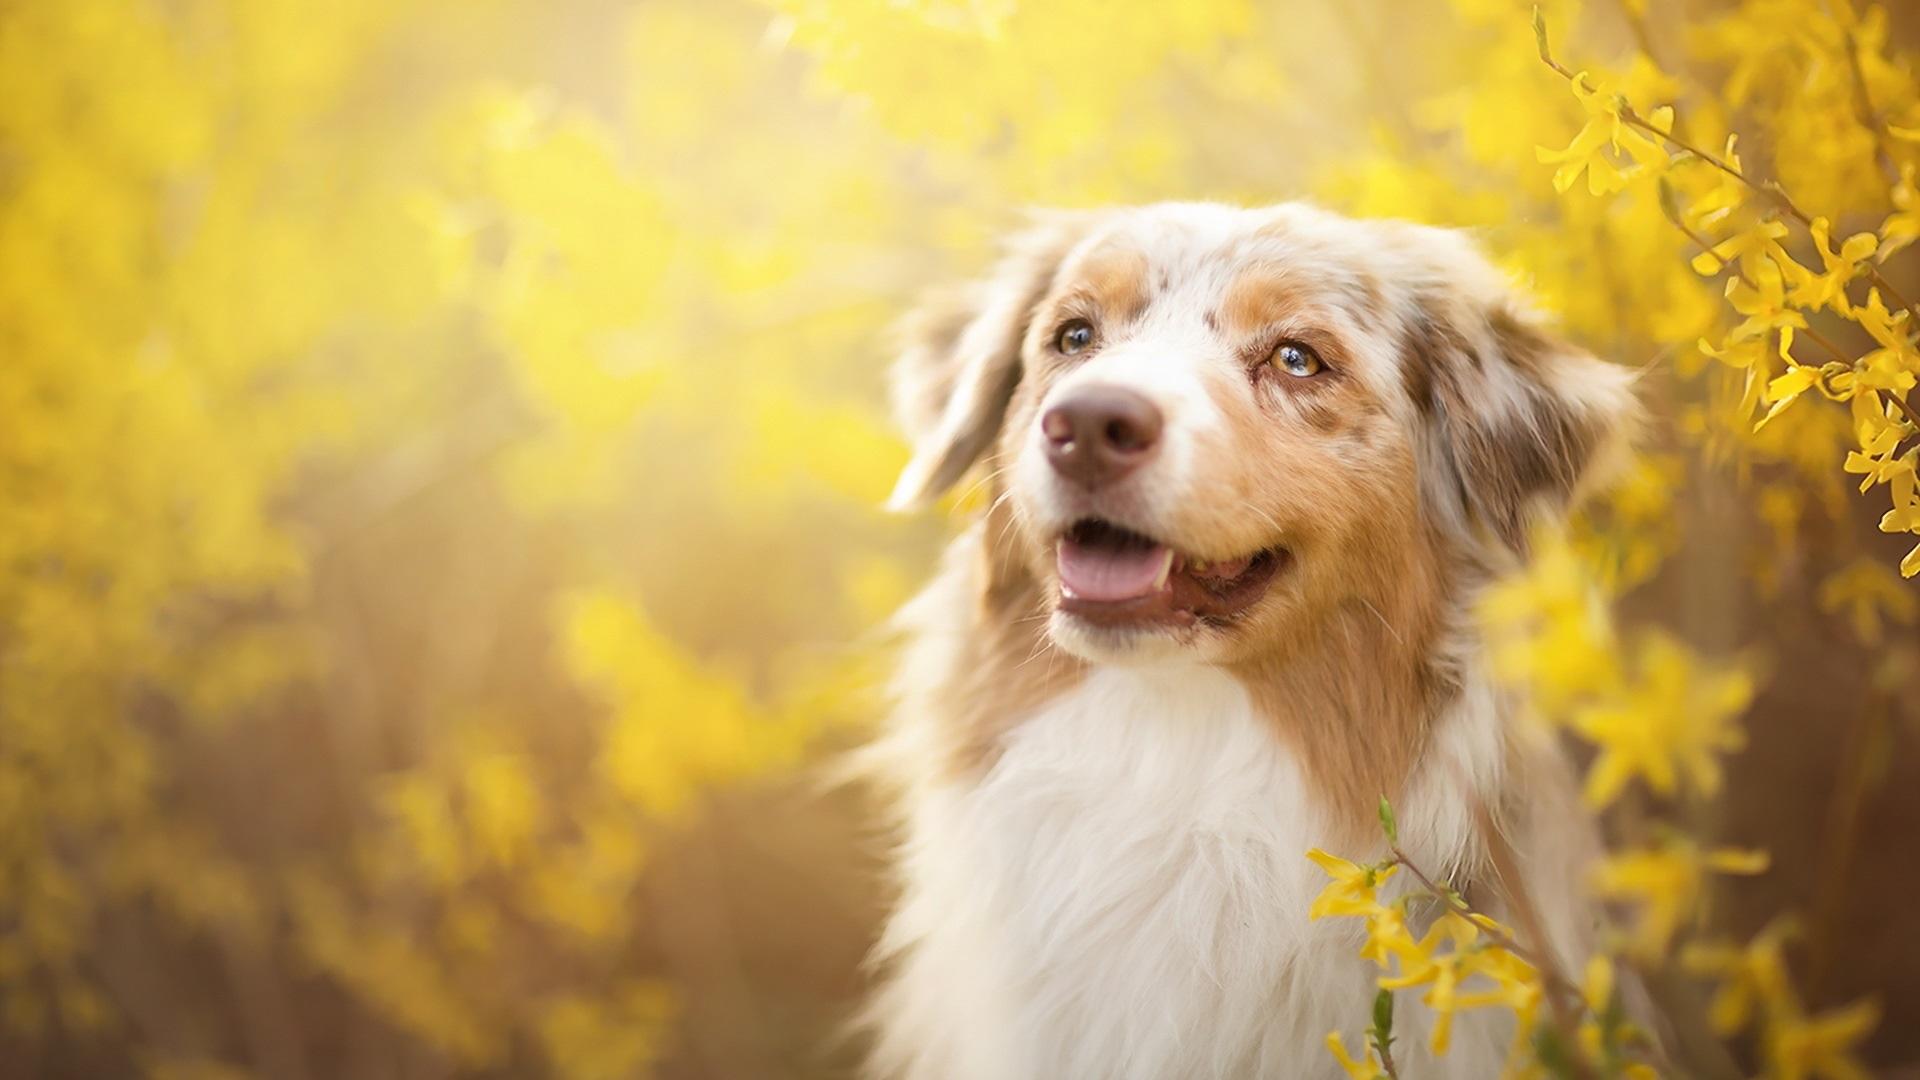 Wallpaper Dog, yellow flowers, spring 1920x1080 Full HD 2K Picture